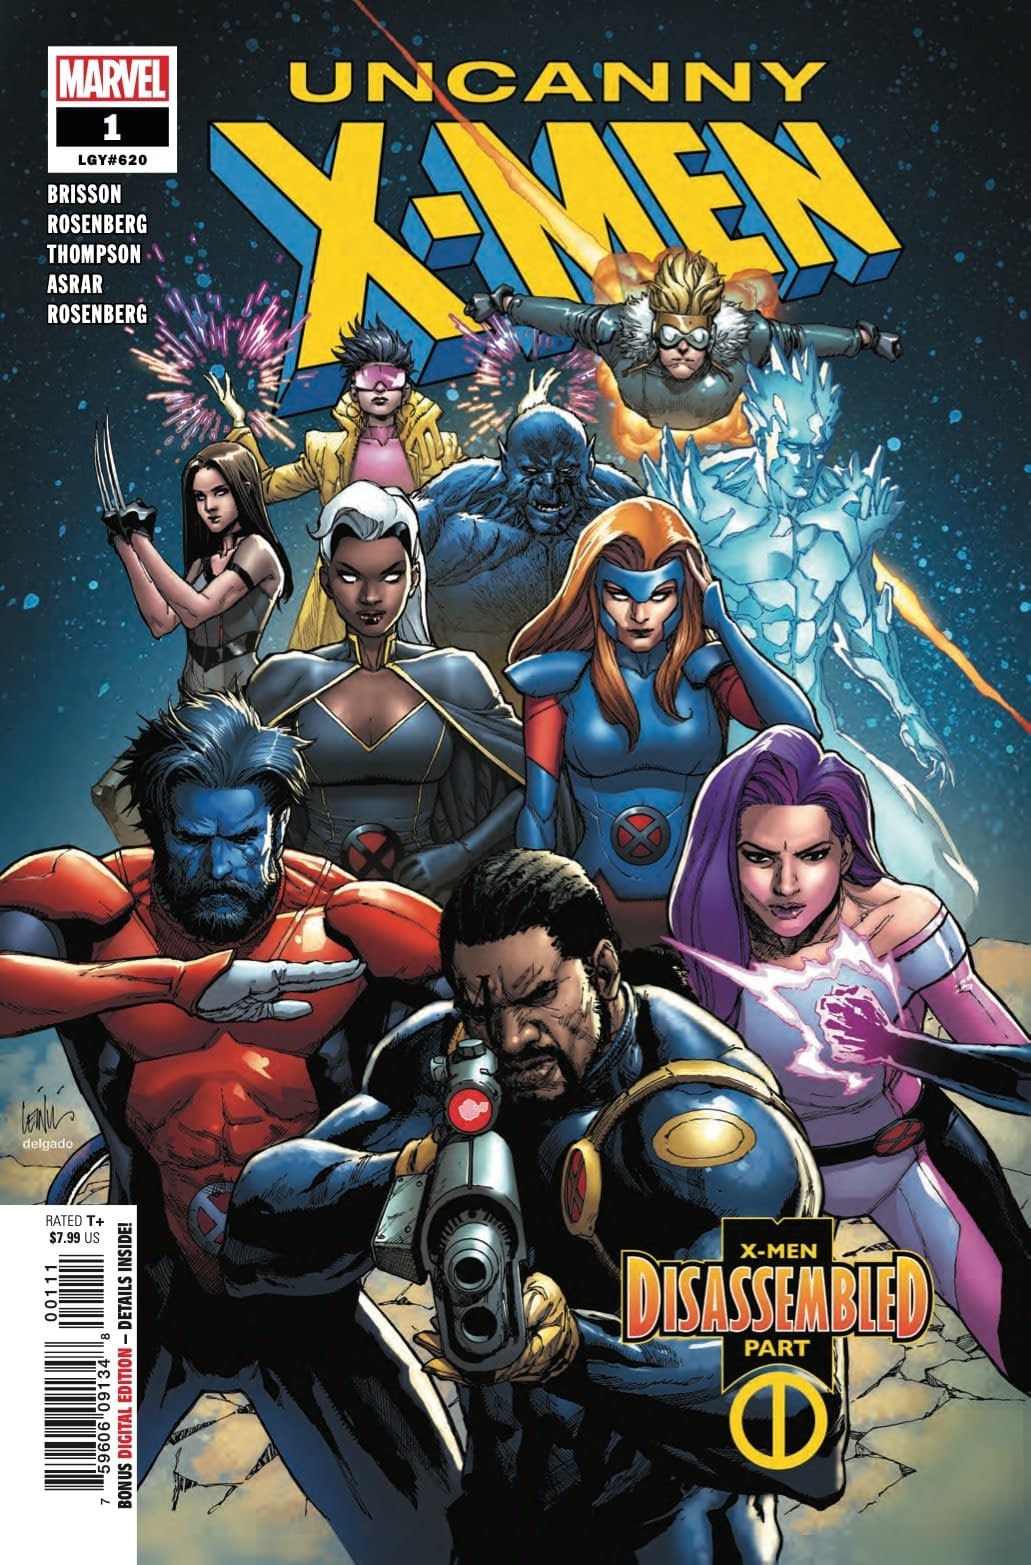 So That's Where Kitty Pryde Went in Next Week's Uncanny X-Men #1